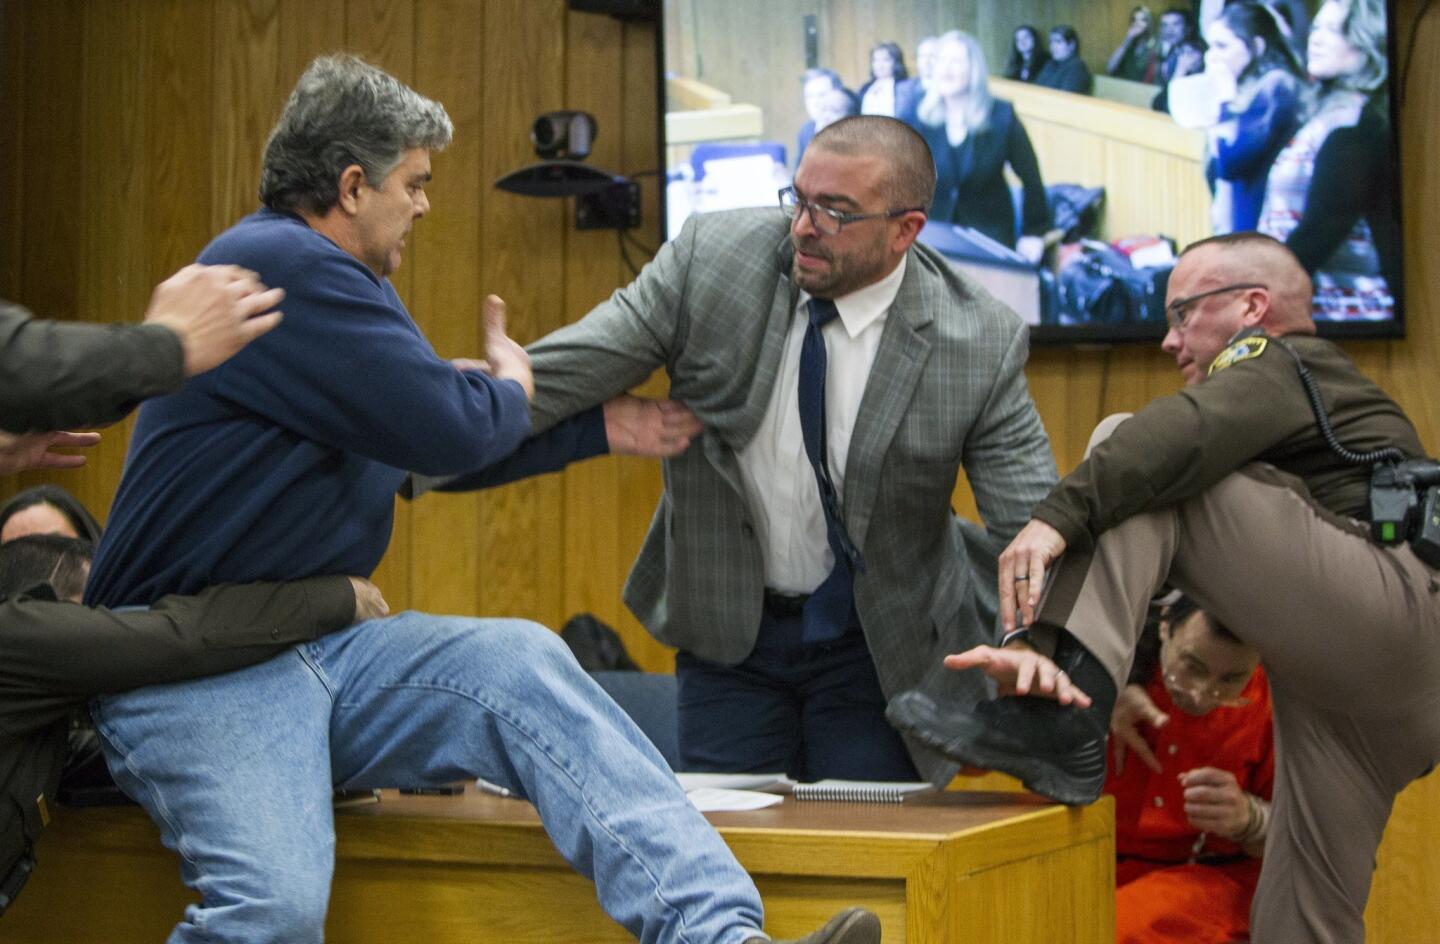 Randall Margraves, father of three victims of Larry Nassar, lunges at Nassar, bottom right, in Eaton County Circuit Court in Charlotte, Mich., on Feb. 2, 2018. The incident came during the third and final sentencing hearing for Nassar on sexual abuse charges.